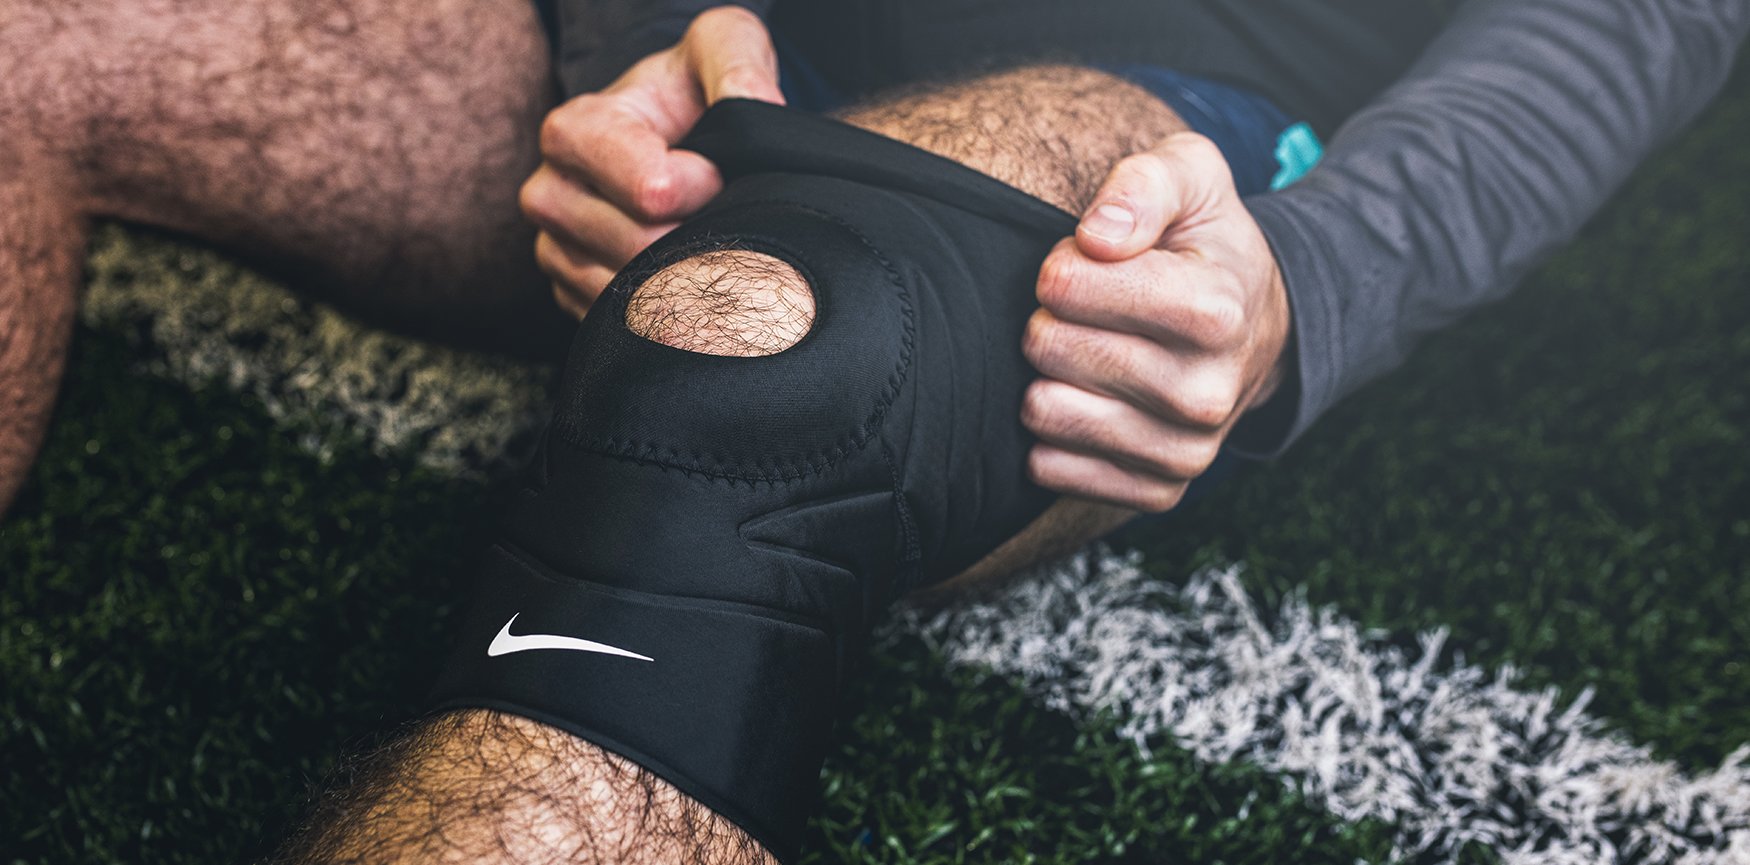 Must-Have Football Accessories - Lovell Soccer